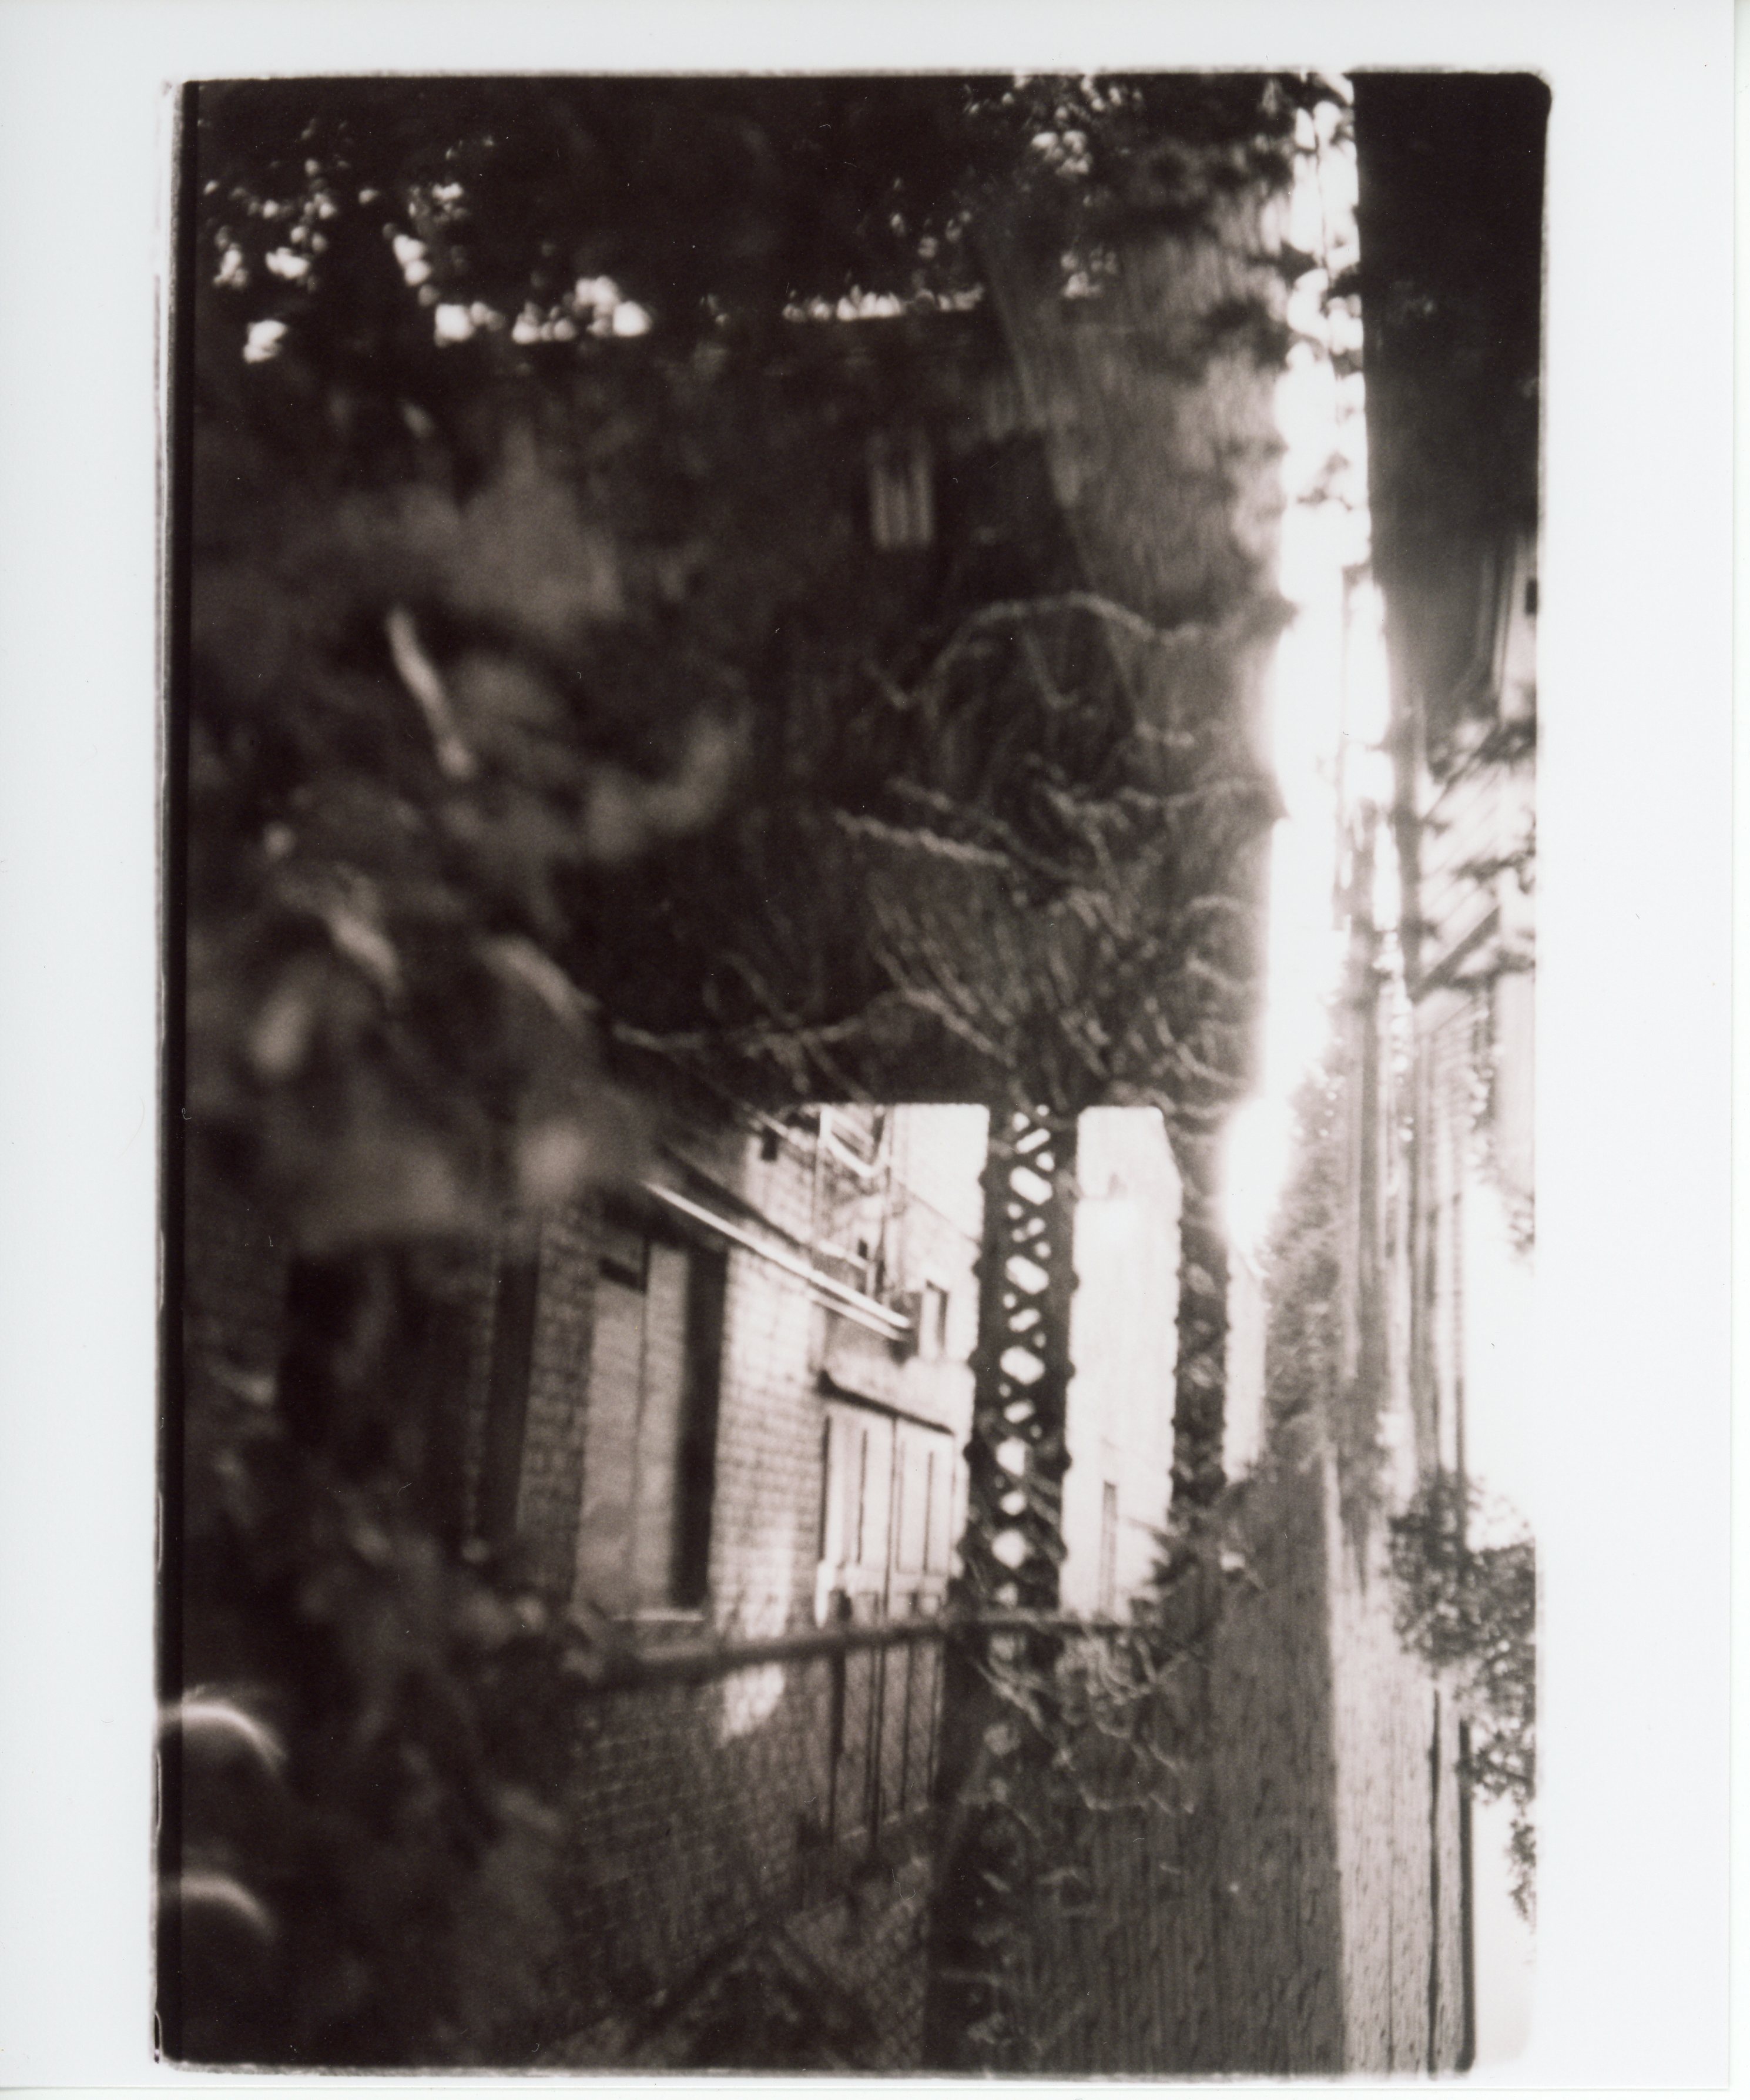 a black and white, sepia toned, 35mm print with messy edges;  the image is a double exposure: one image shows out of focus vines growing on a wall, and the other image looks down an alleyway into the sunset, underneath an exterior stairwell